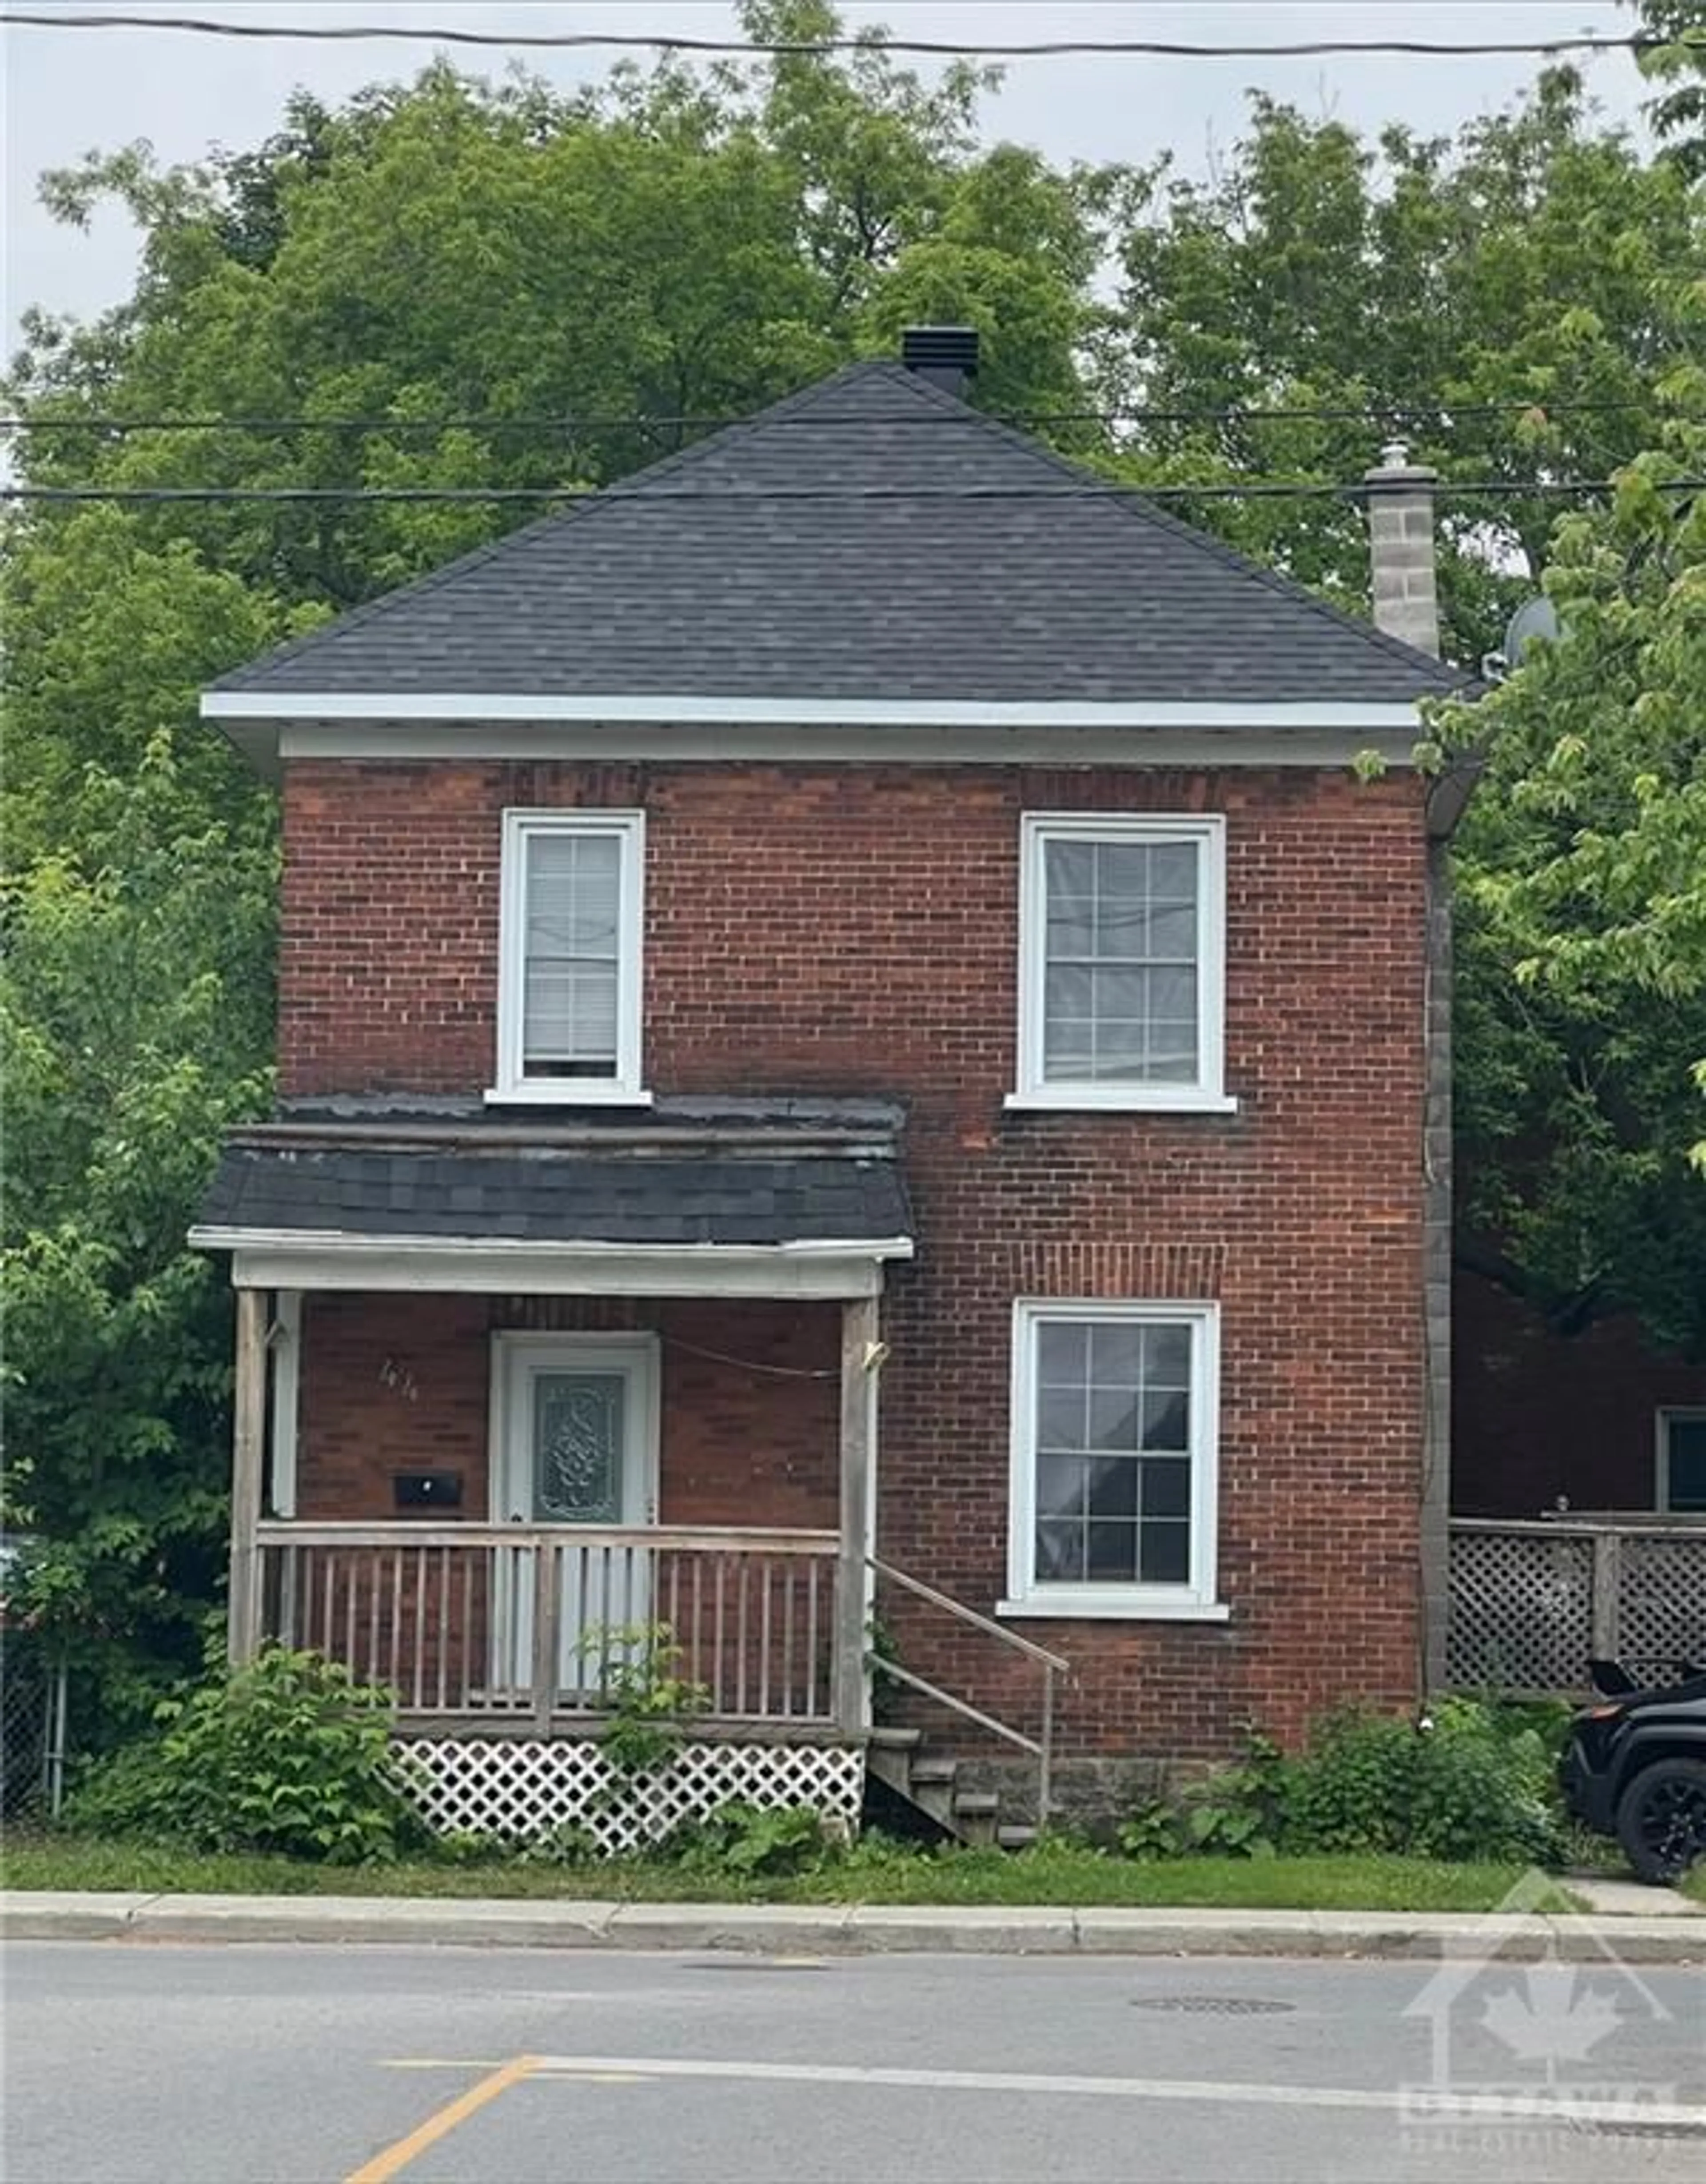 Home with brick exterior material for 44 OGDEN Ave, Smiths Falls Ontario K7A 2L8